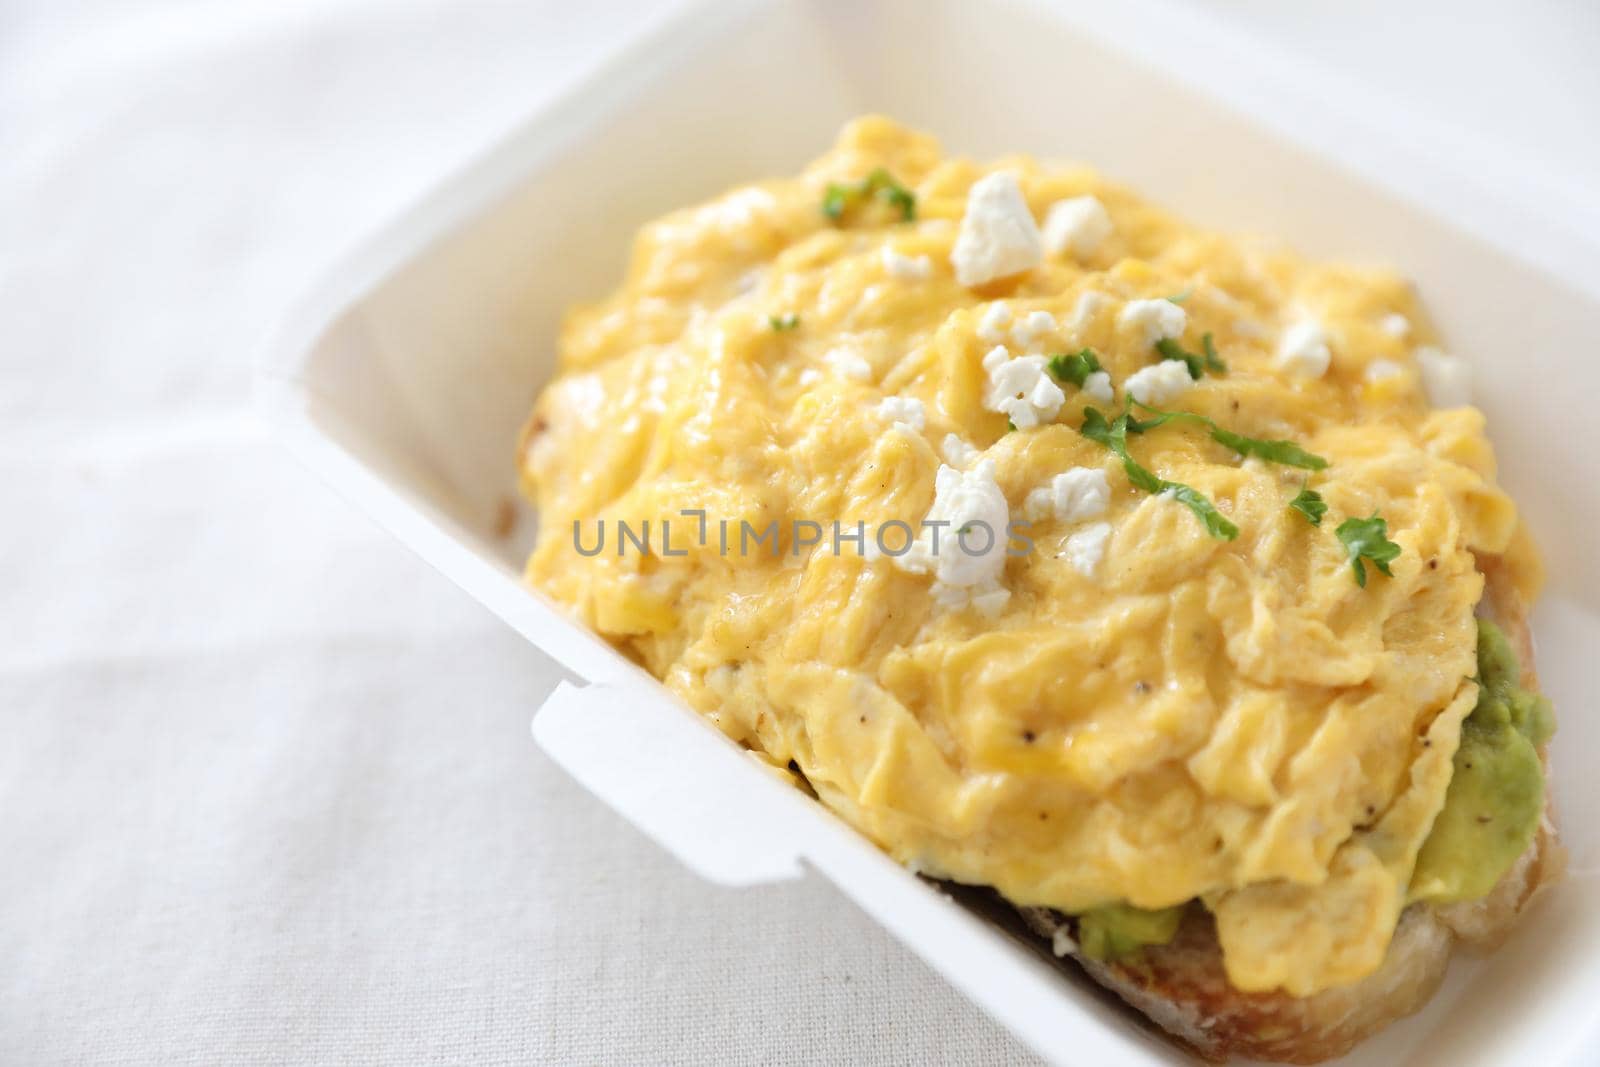 Avocado and scrambled eggs toast with delivery package in white background